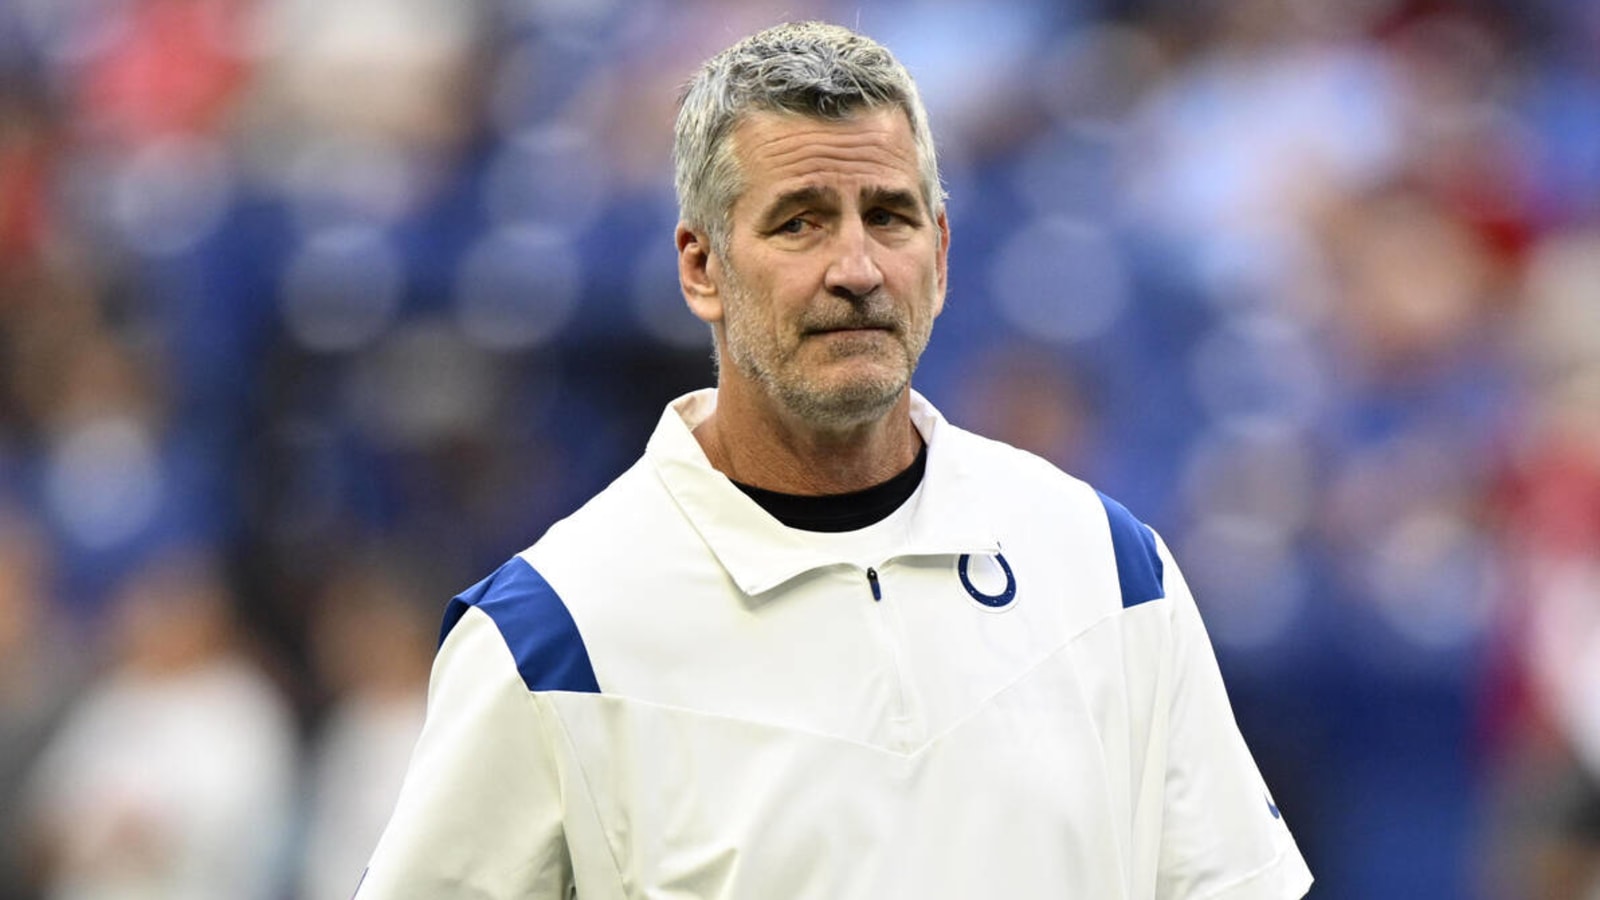 Possible candidates for Rams' offensive coordinator position